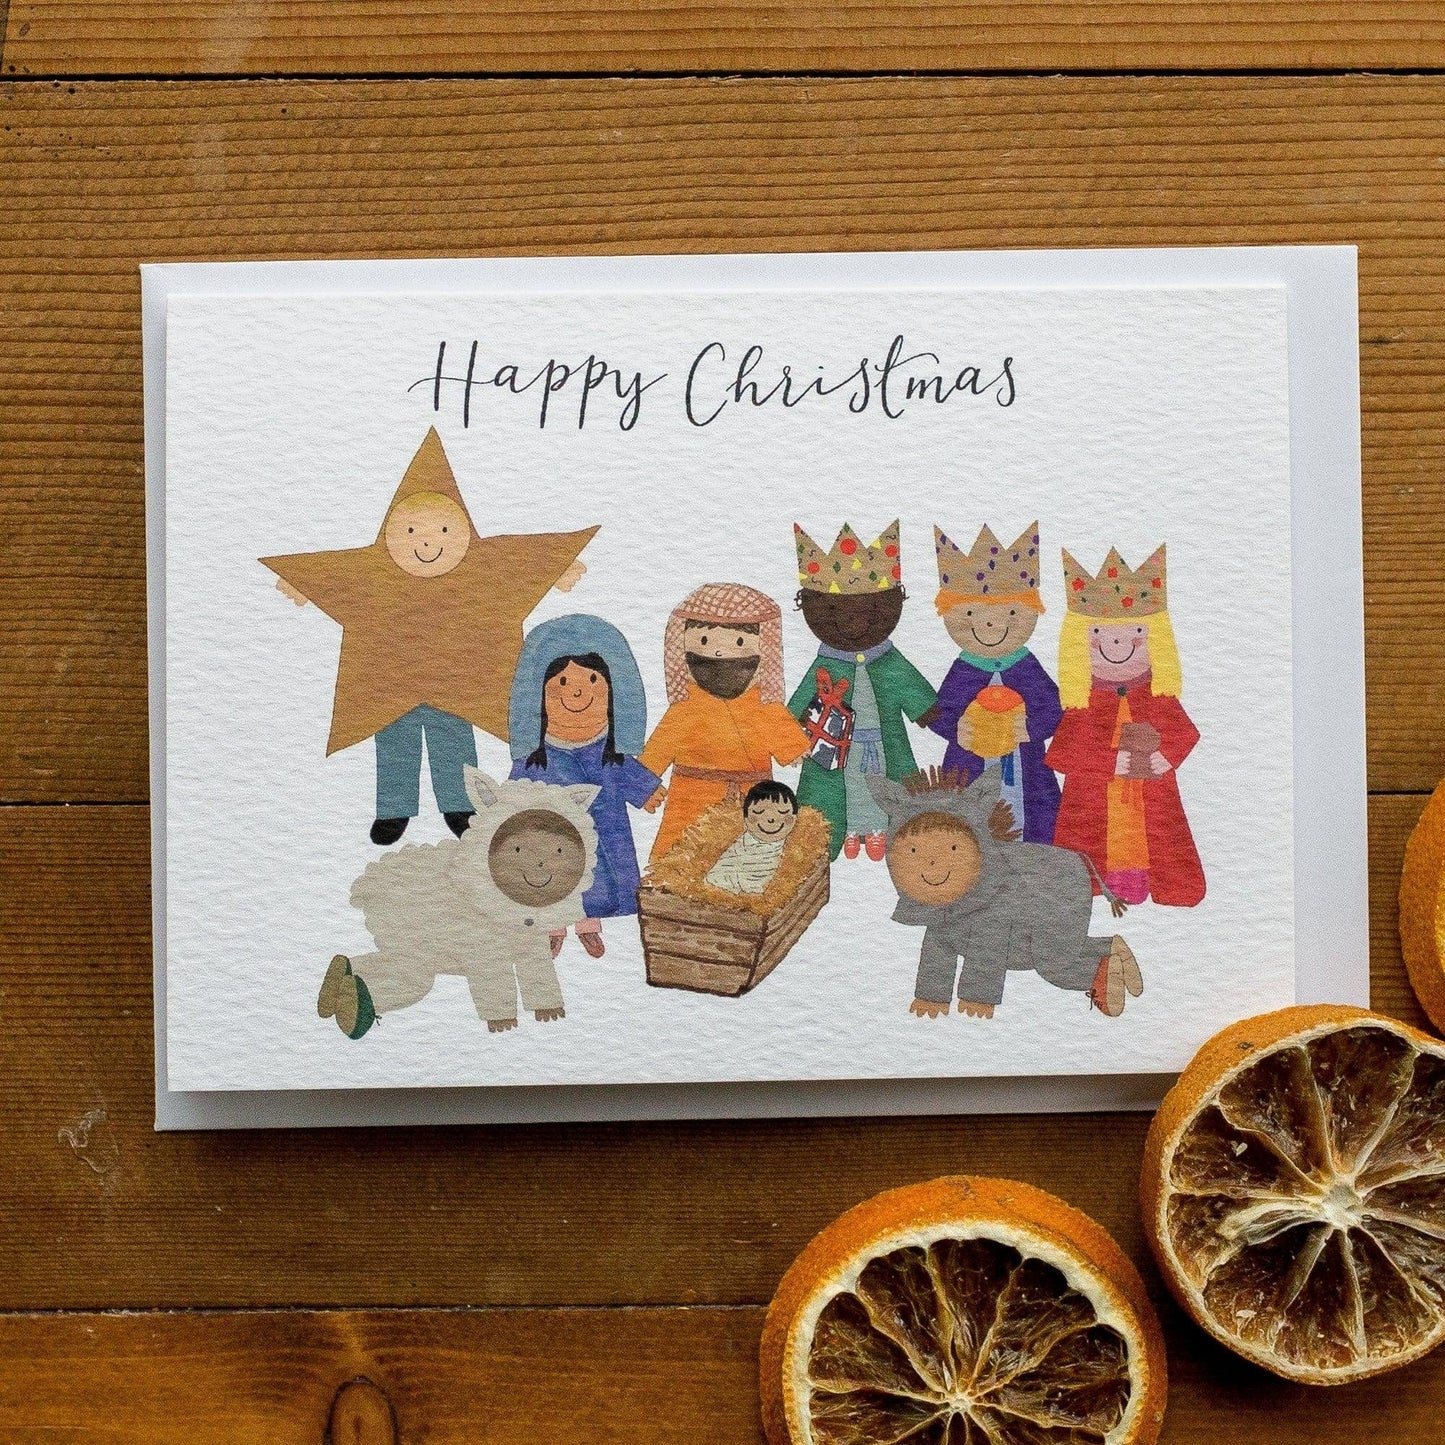 And Hope Designs Greeting & Note Cards Christmas cards - nativity